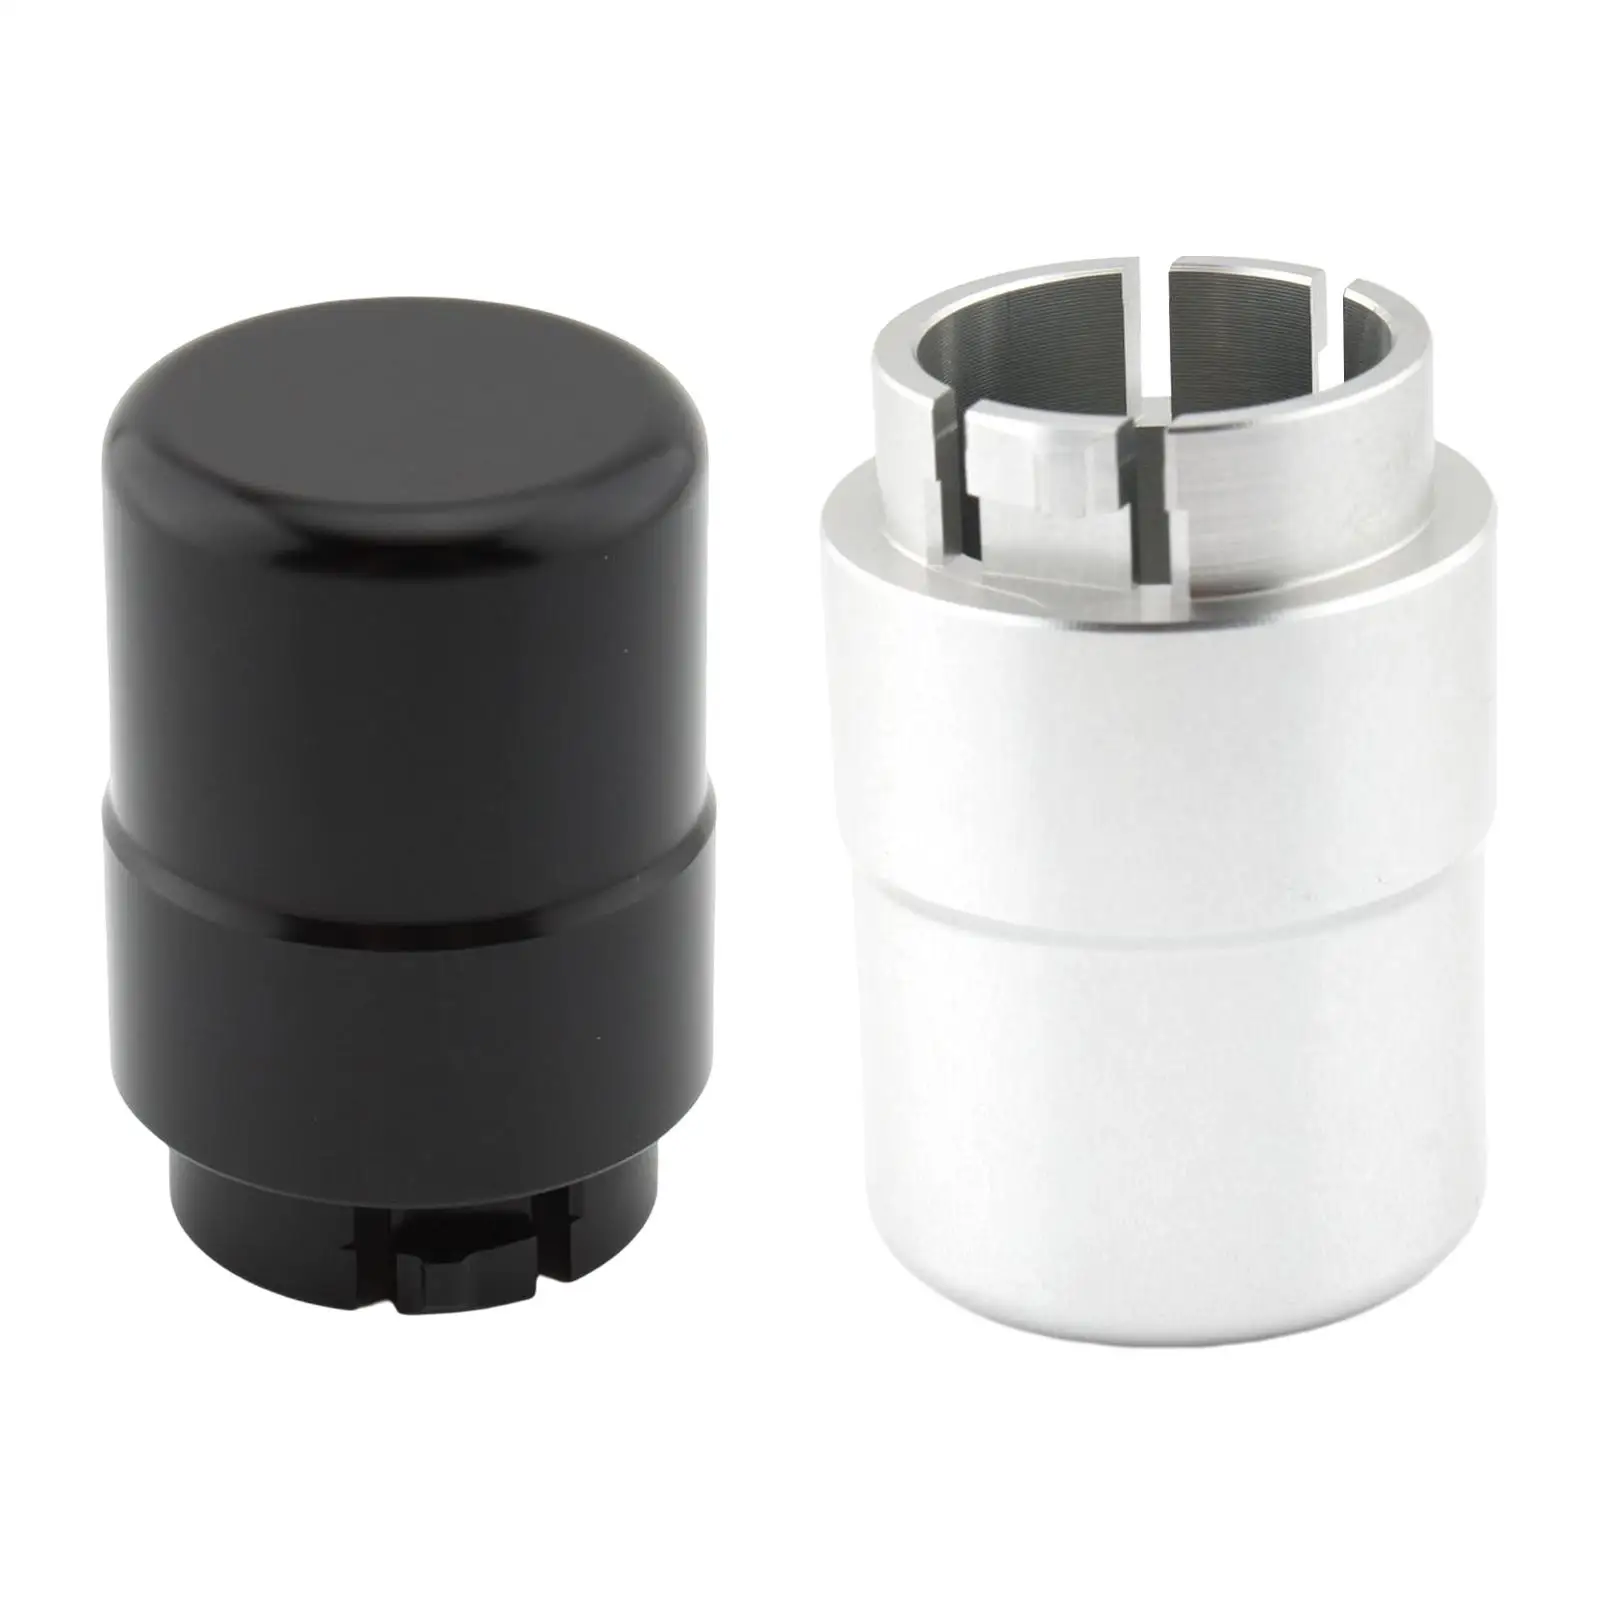 Aluminum Alloy Transmission Shifter Button Replaces Easy Installation Durable Accessory